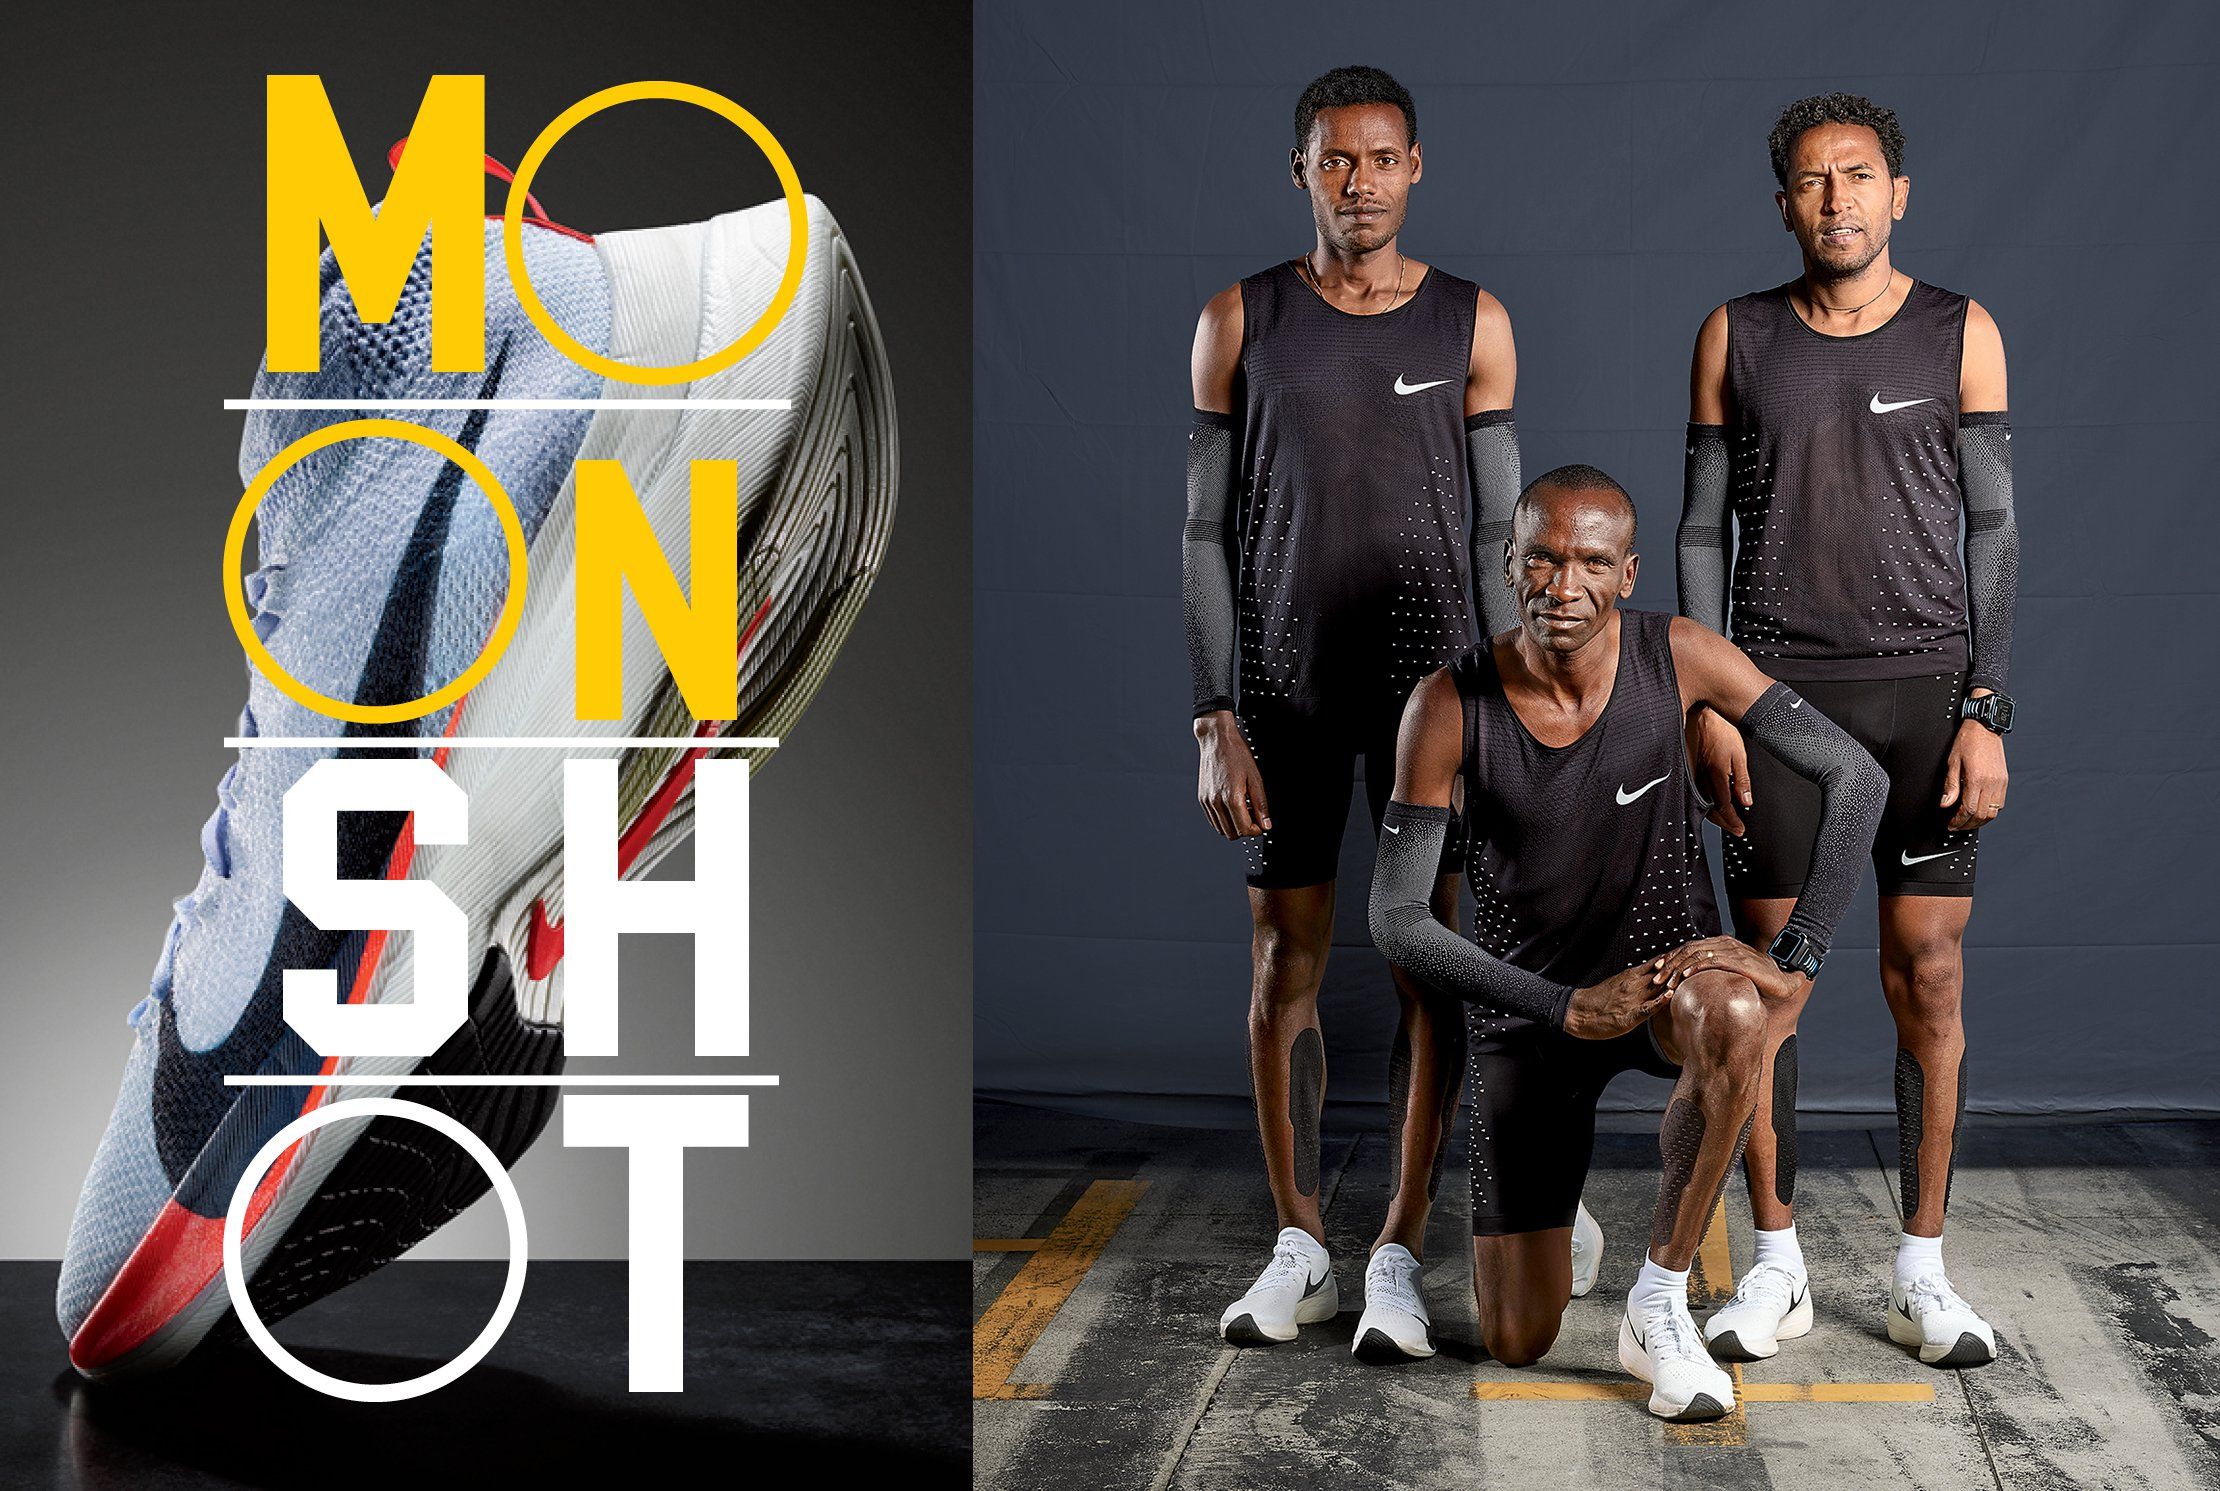 An Exclusive, Behind-the-Scenes Look at How Nike Is Trying Break 2-Hour Marathon | Runner's World